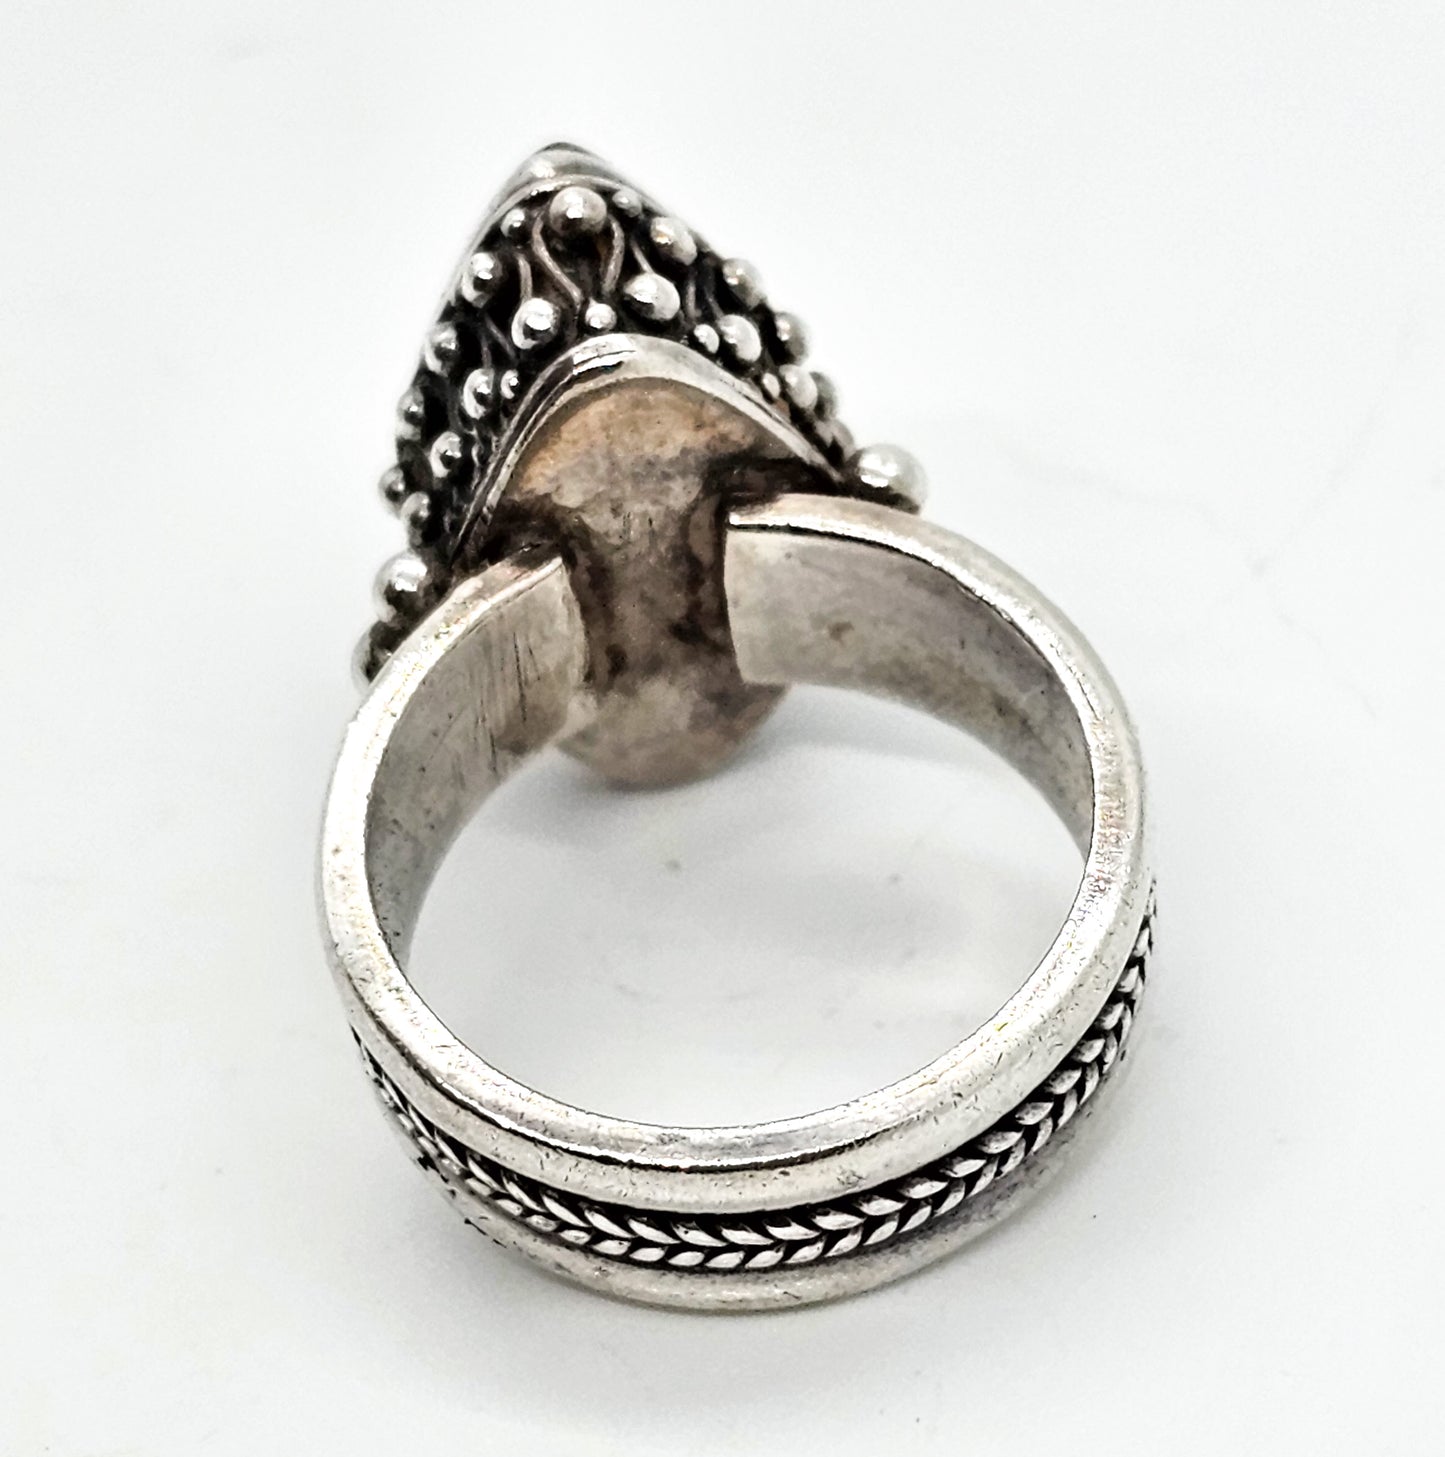 Ribbed Smokey Quartz elaborate woven wheat sterling silver ring size 7.5